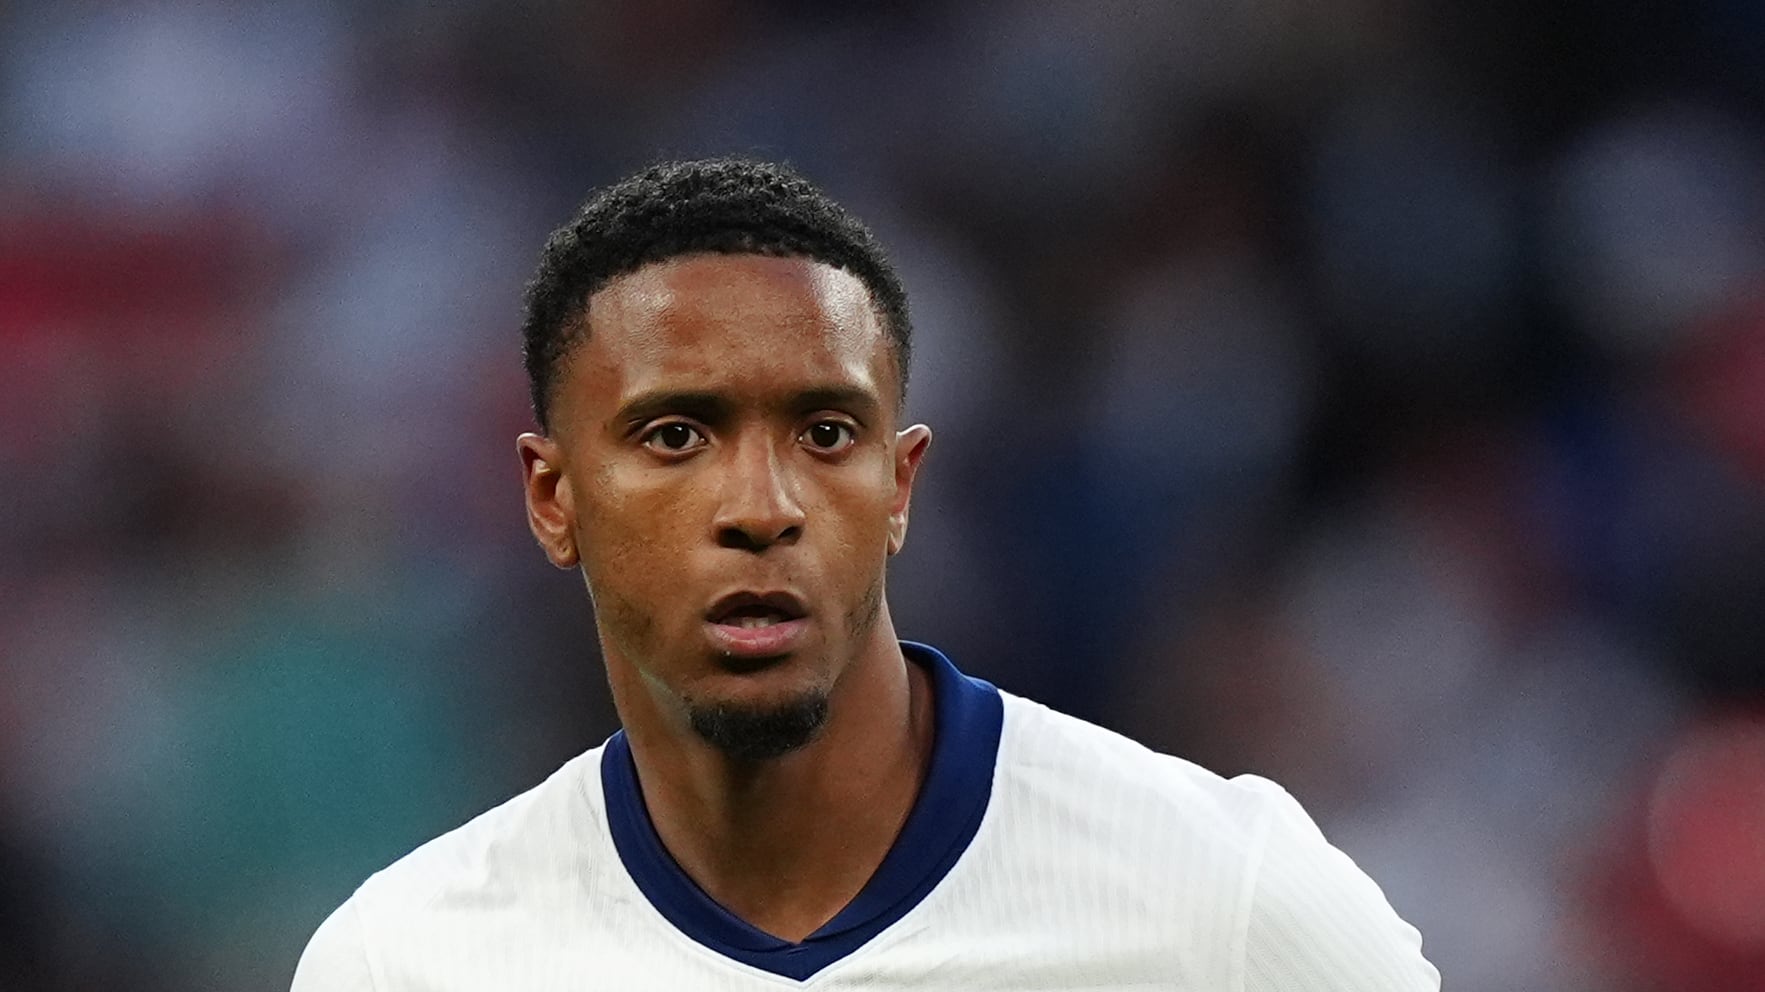 Ezri Konsa could be an option for England against Switzerland